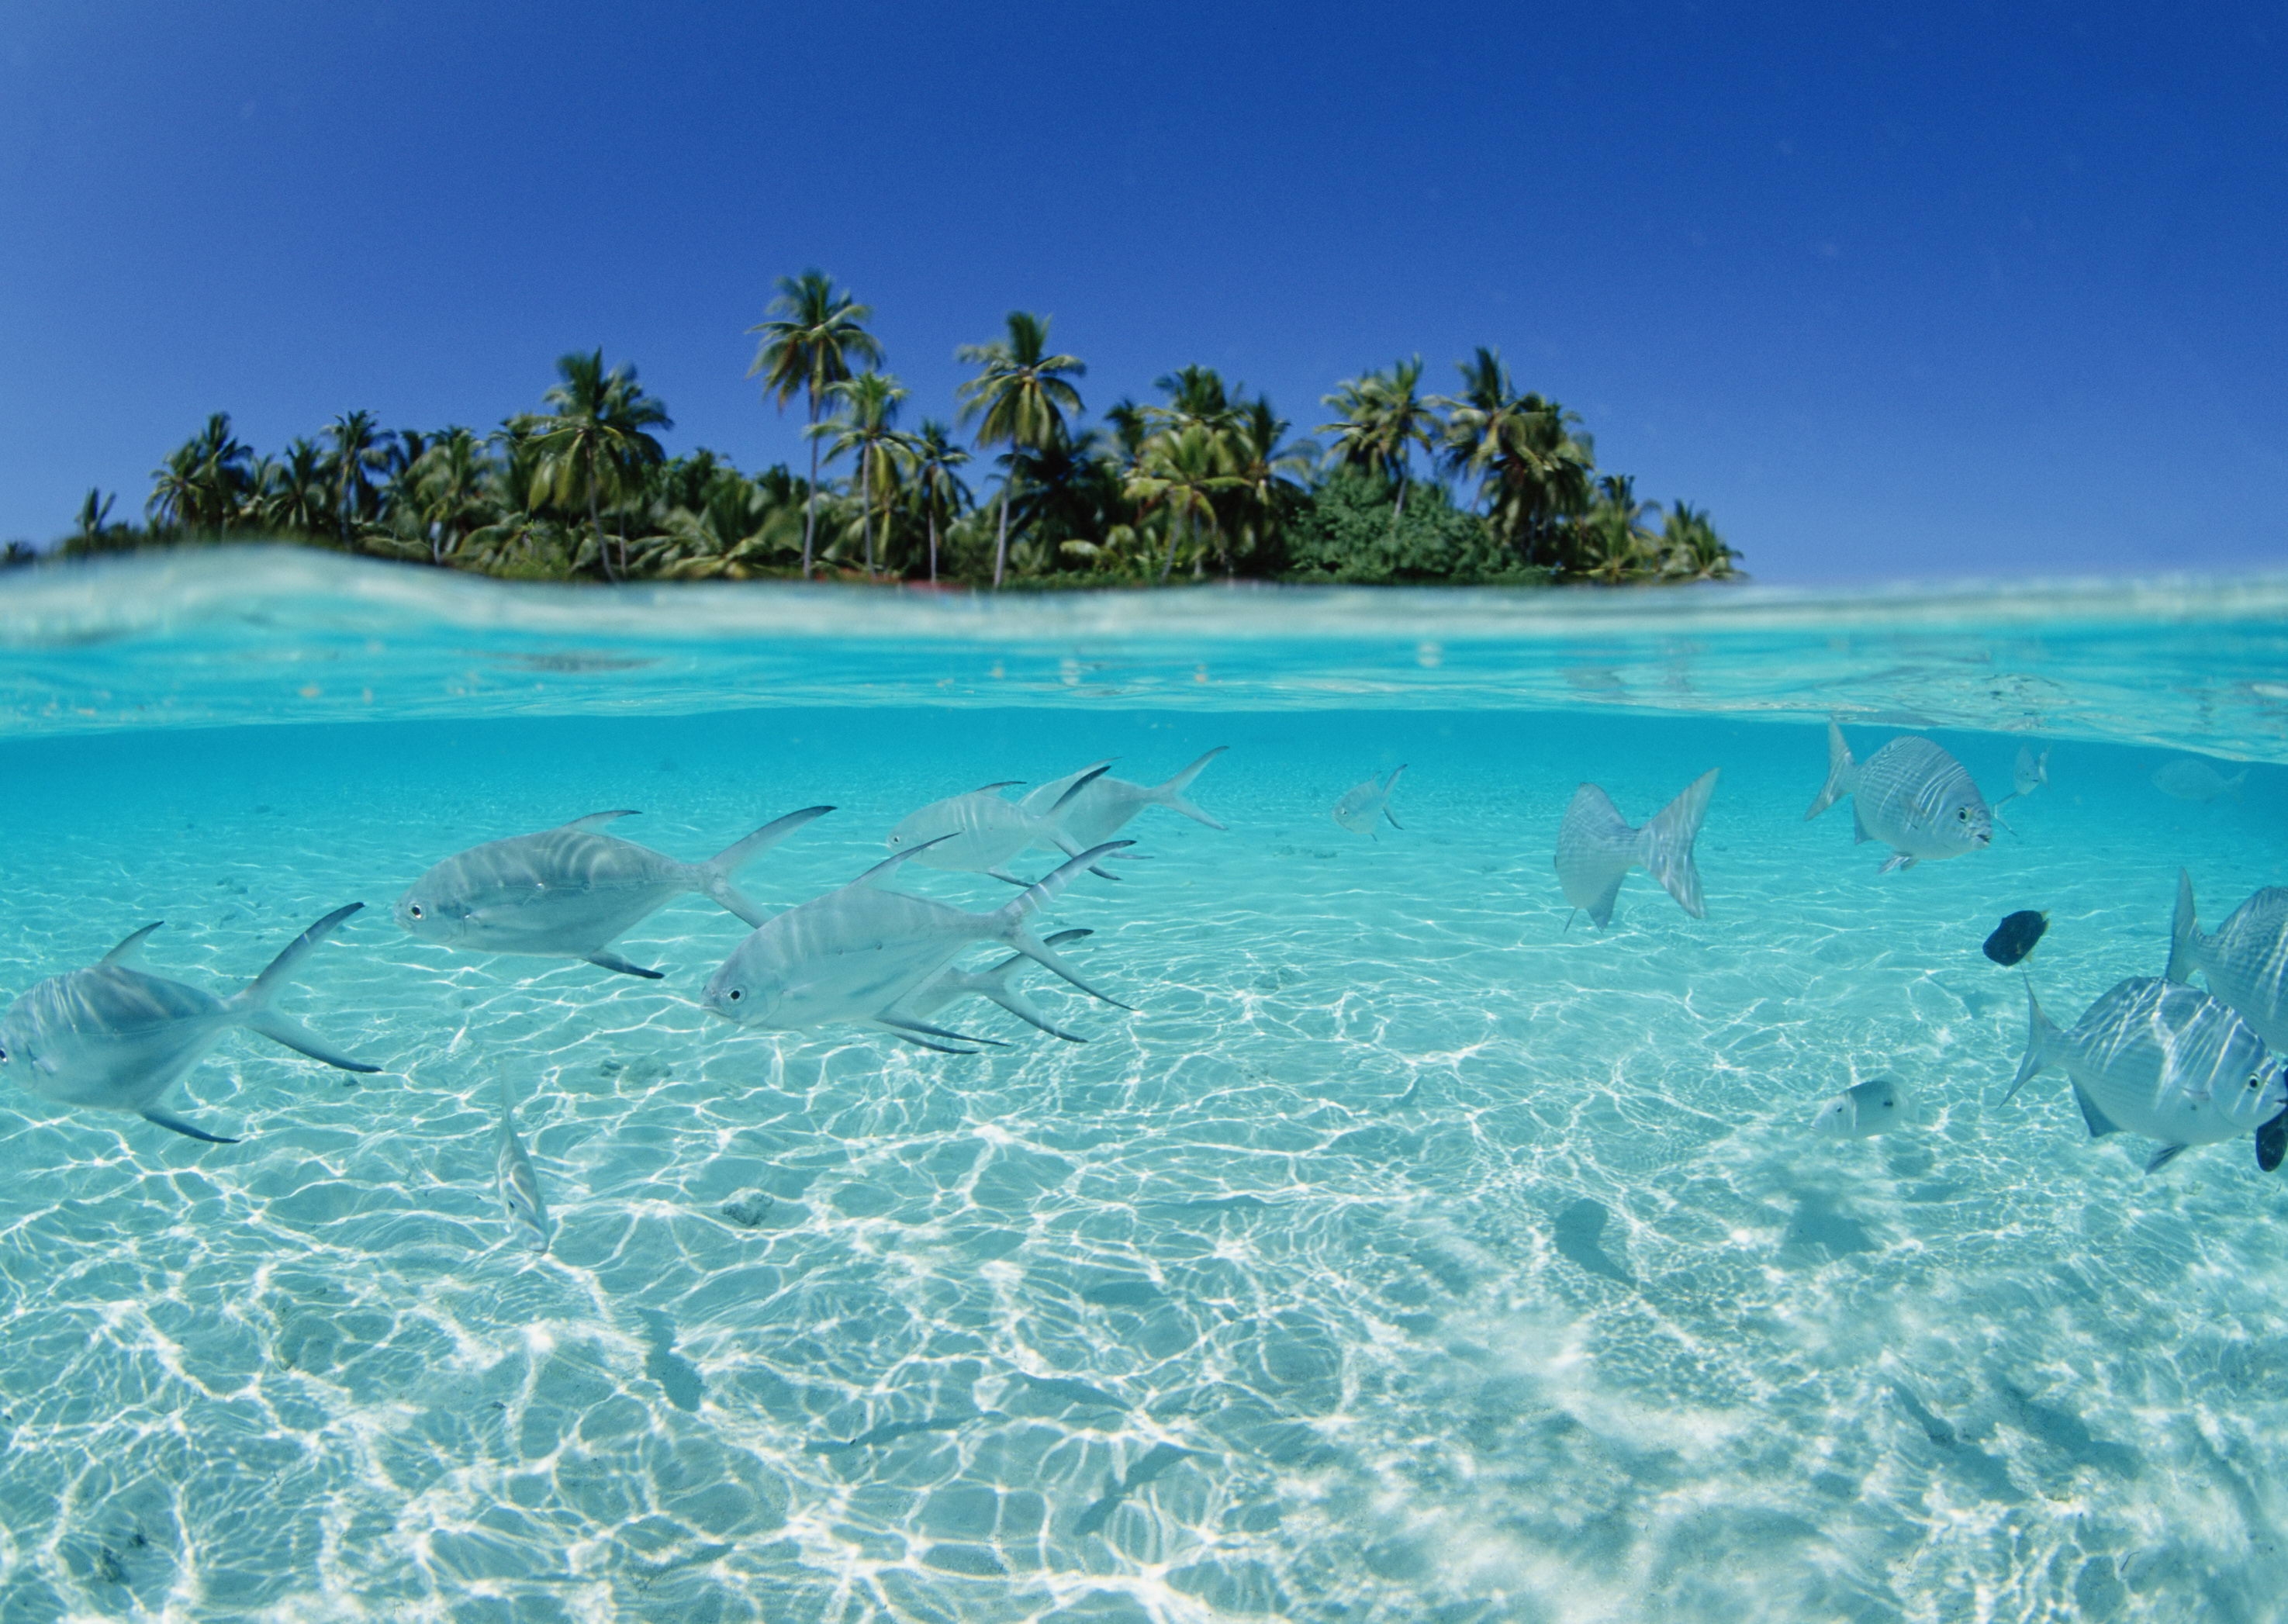 85154 download wallpaper nature, sea, palms, fishes, flock, island, shallow water, shoal screensavers and pictures for free